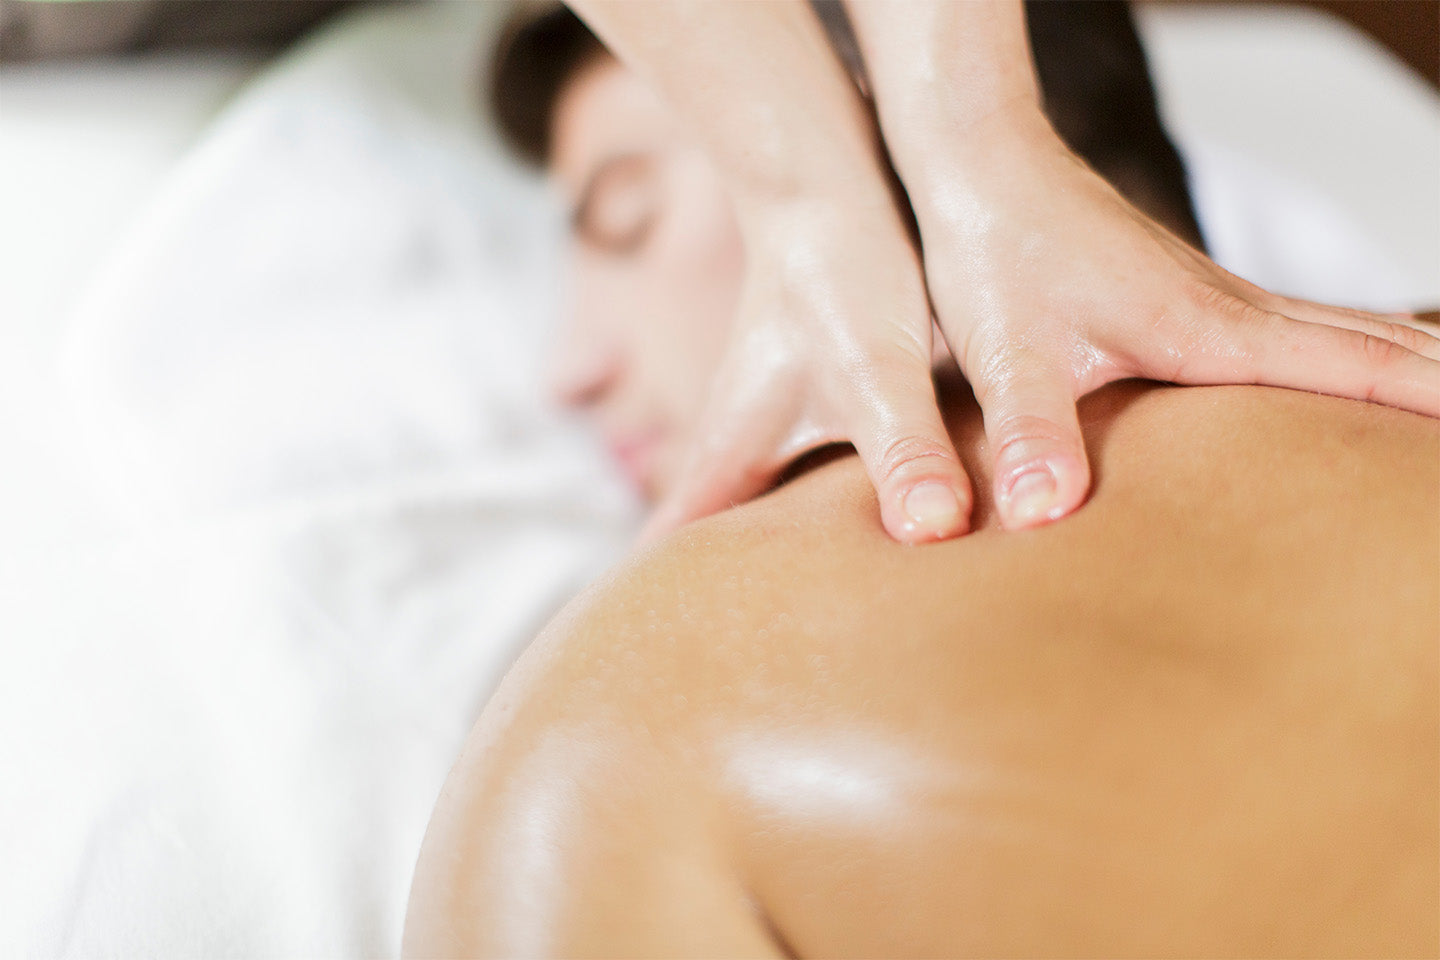 A close up shot of a relaxed man getting his shoulders massaged by a woman's hands.